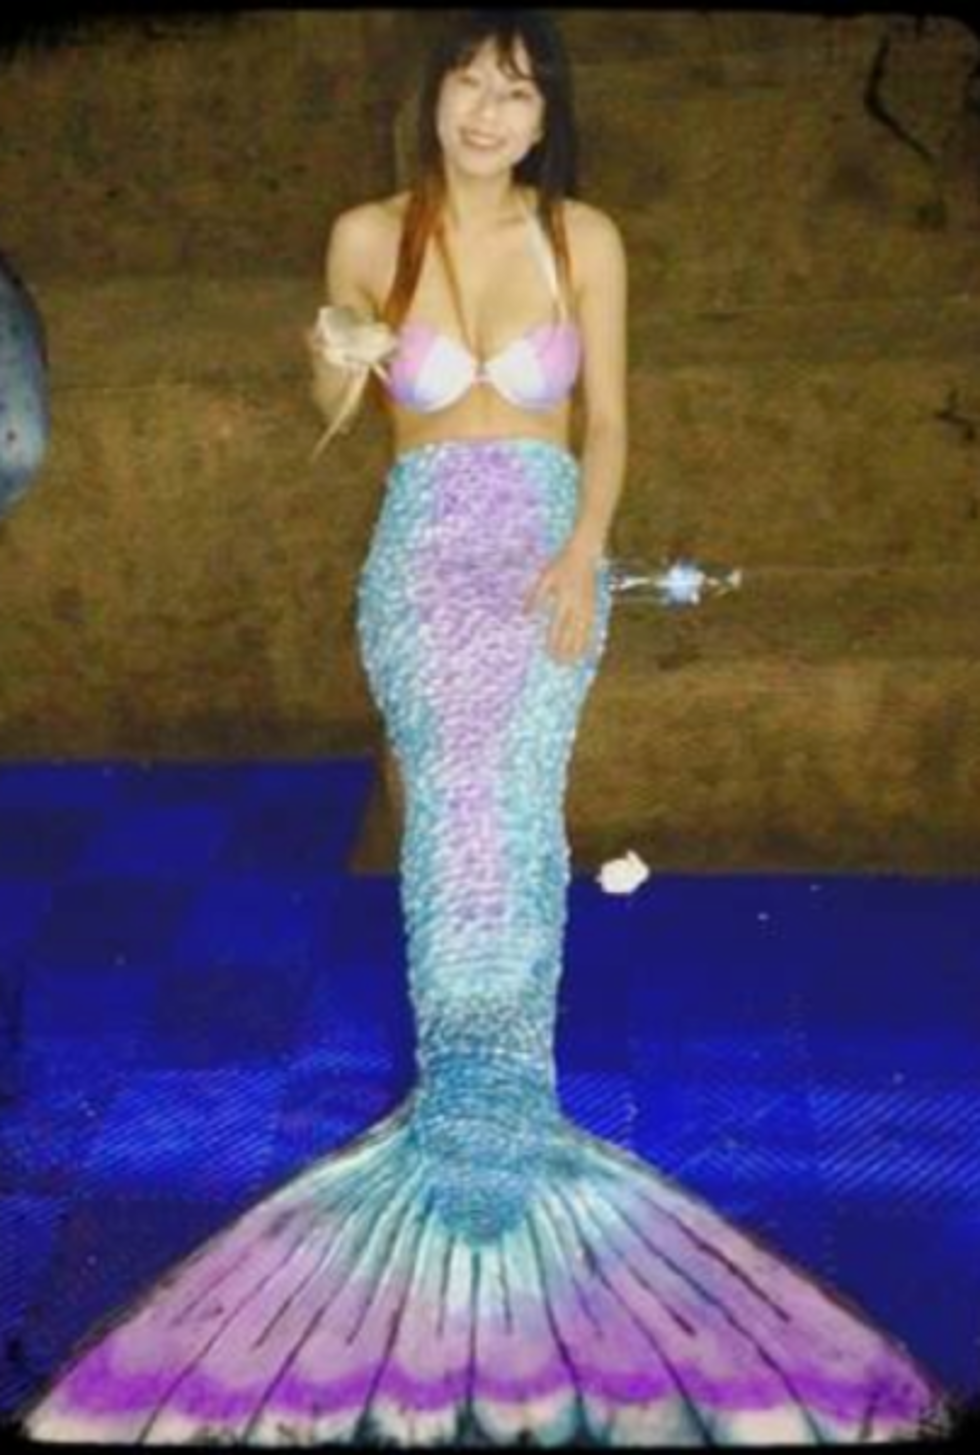 Meet The Only Magic Valley Mermaid-For-Hire